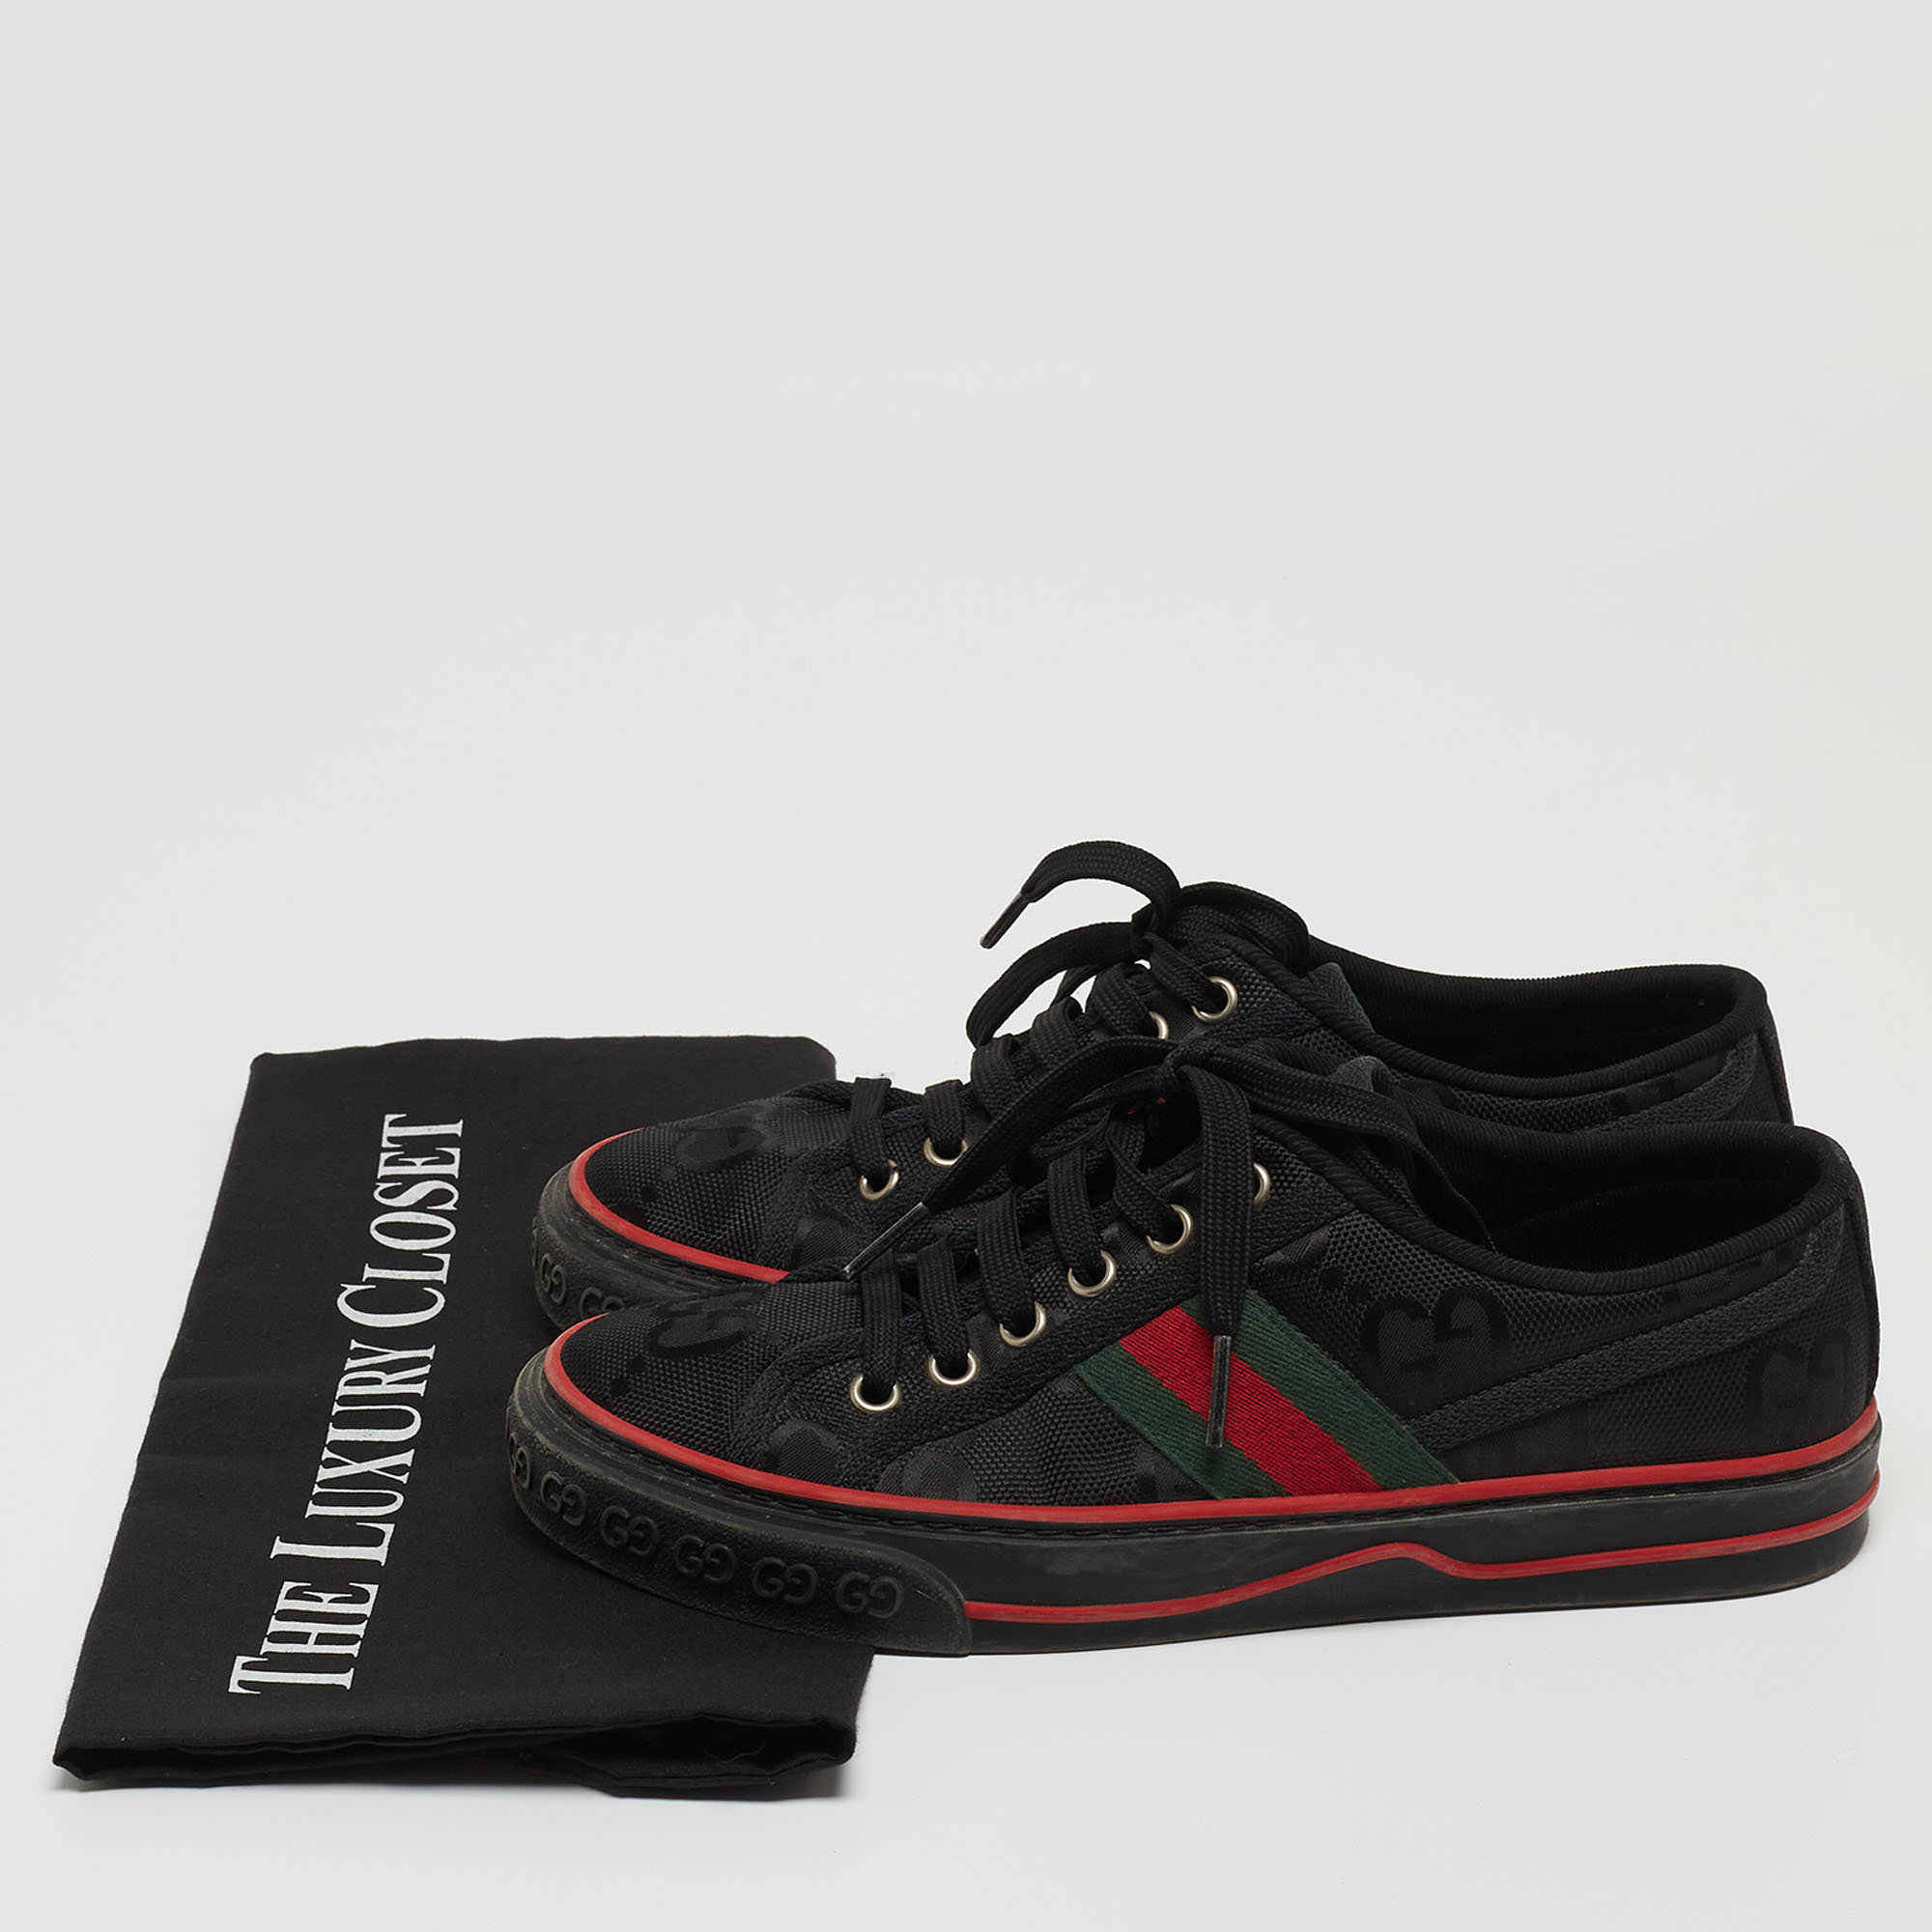 Gucci Black GG Canvas Tennis 1977 Sneakers Size 36